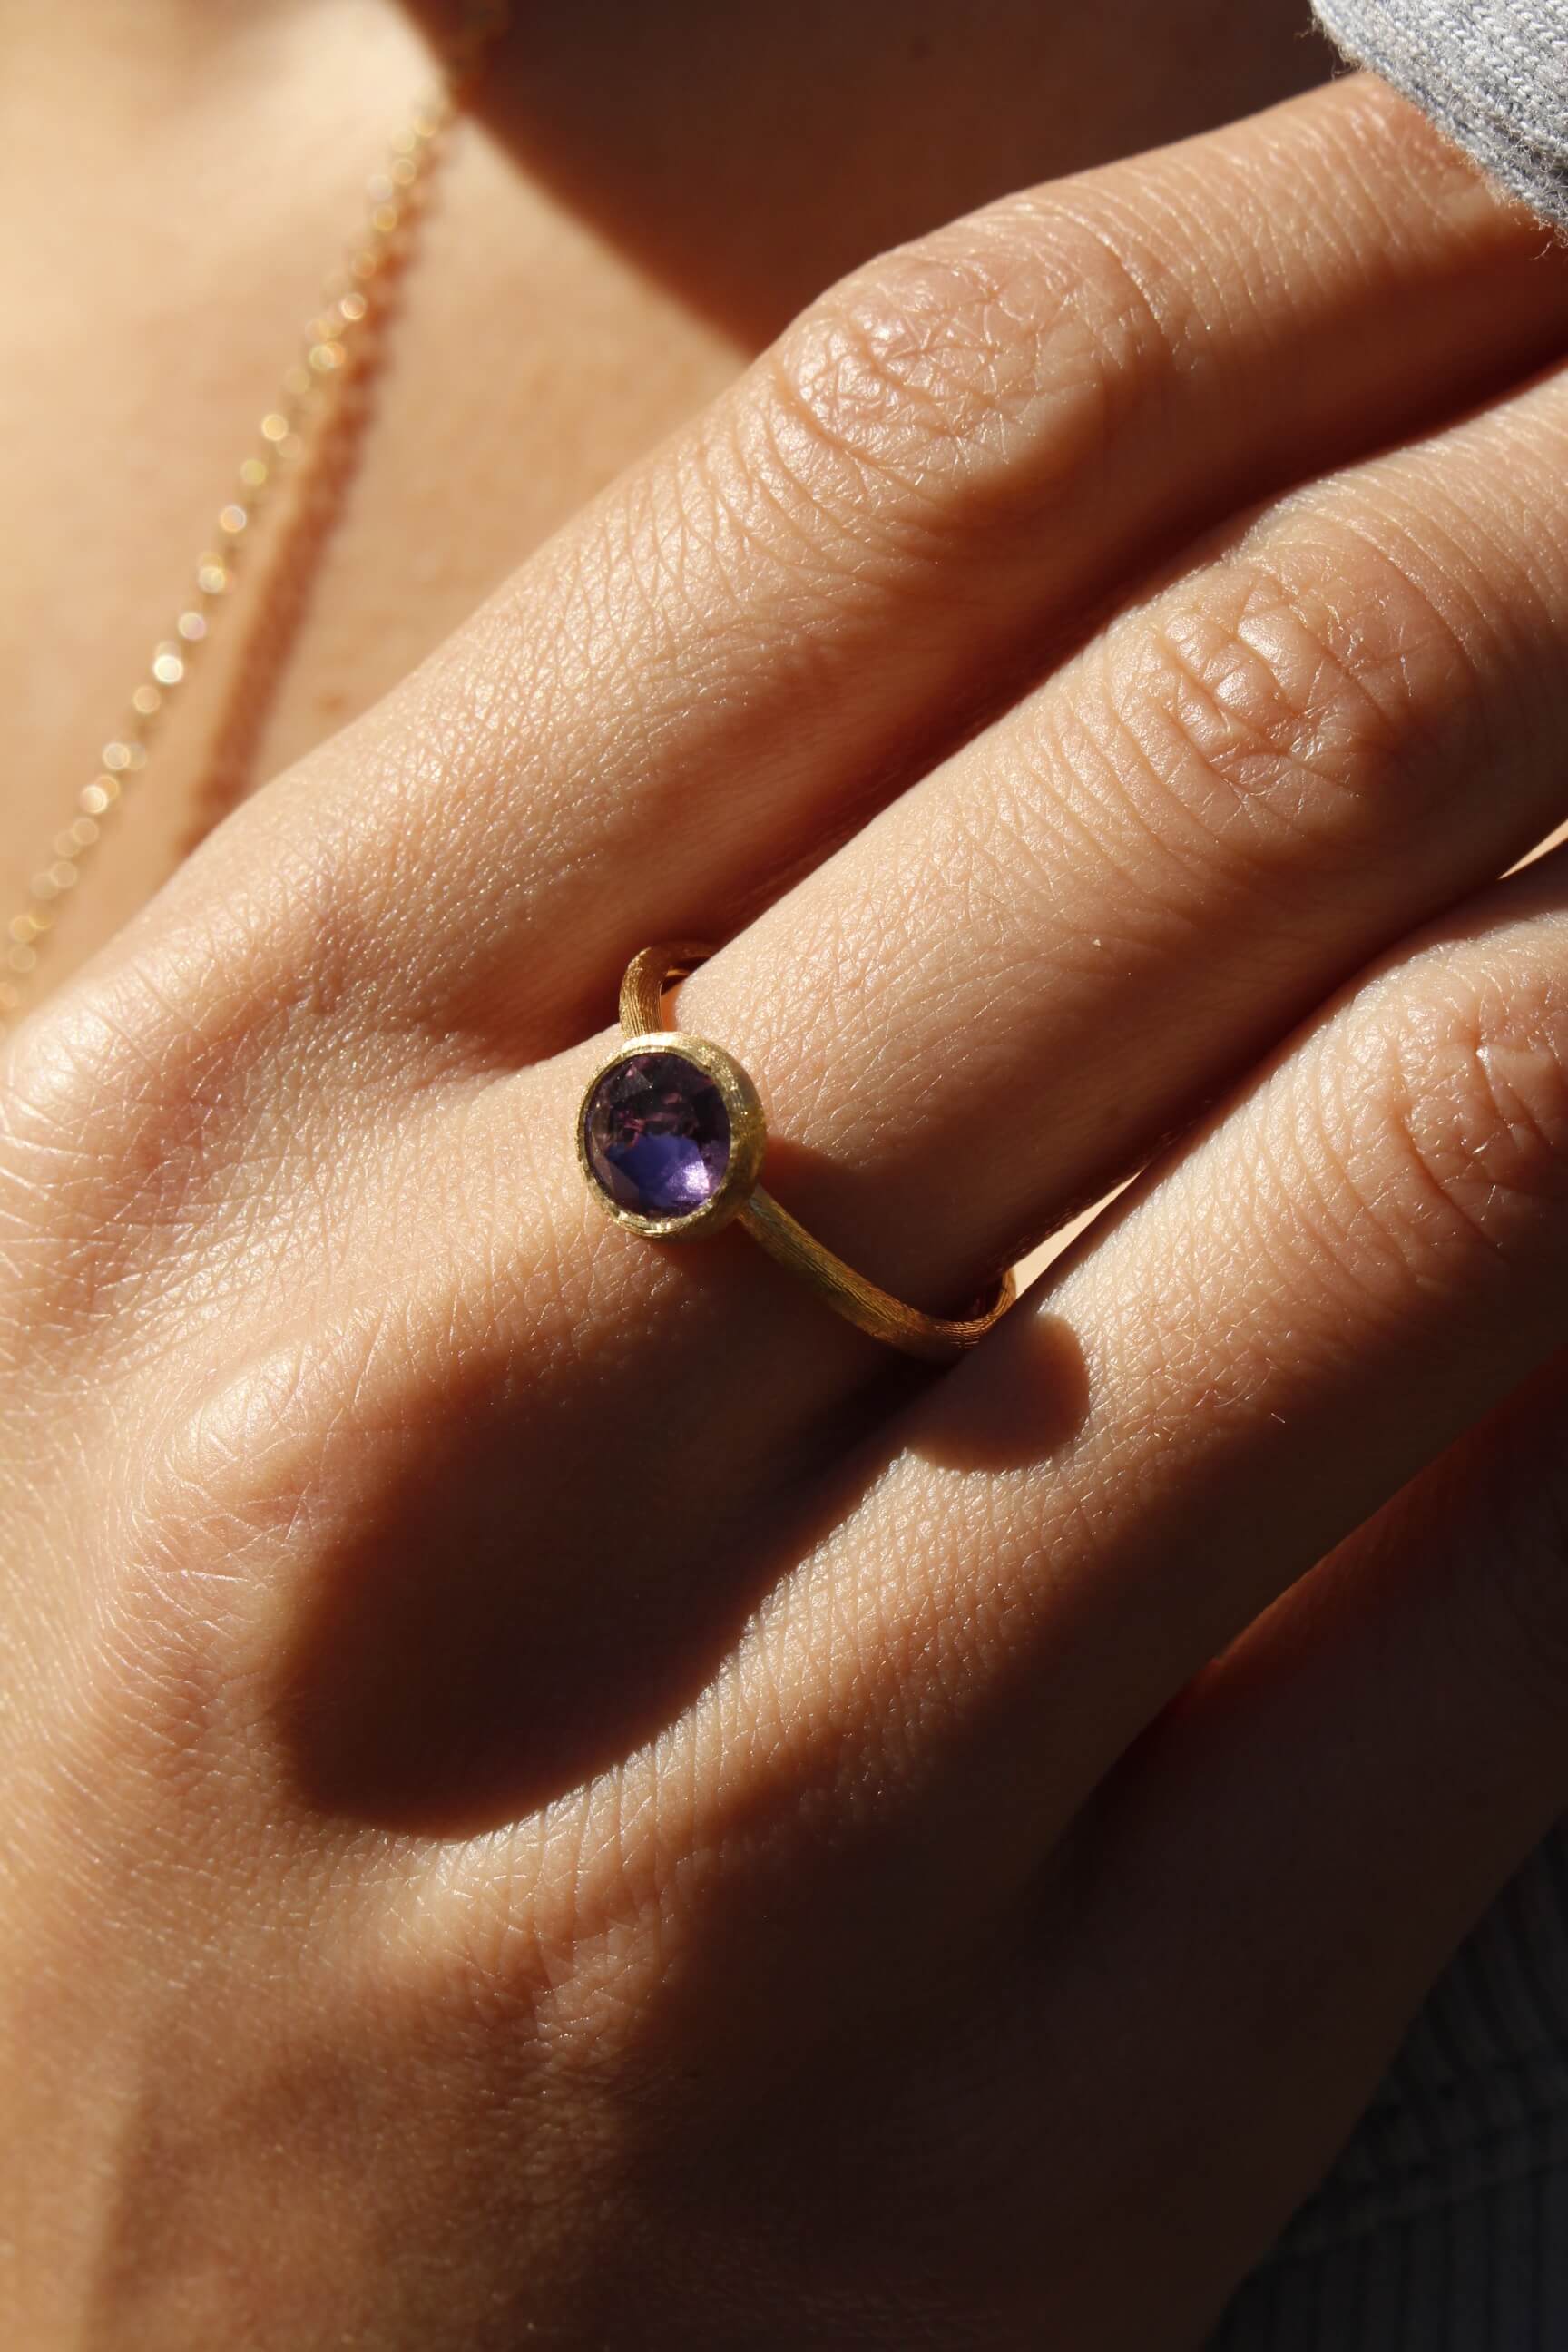 Jaipur Colour Ring in 18k Yellow Gold with Light Amethyst Mini - Orsini Jewellers NZ